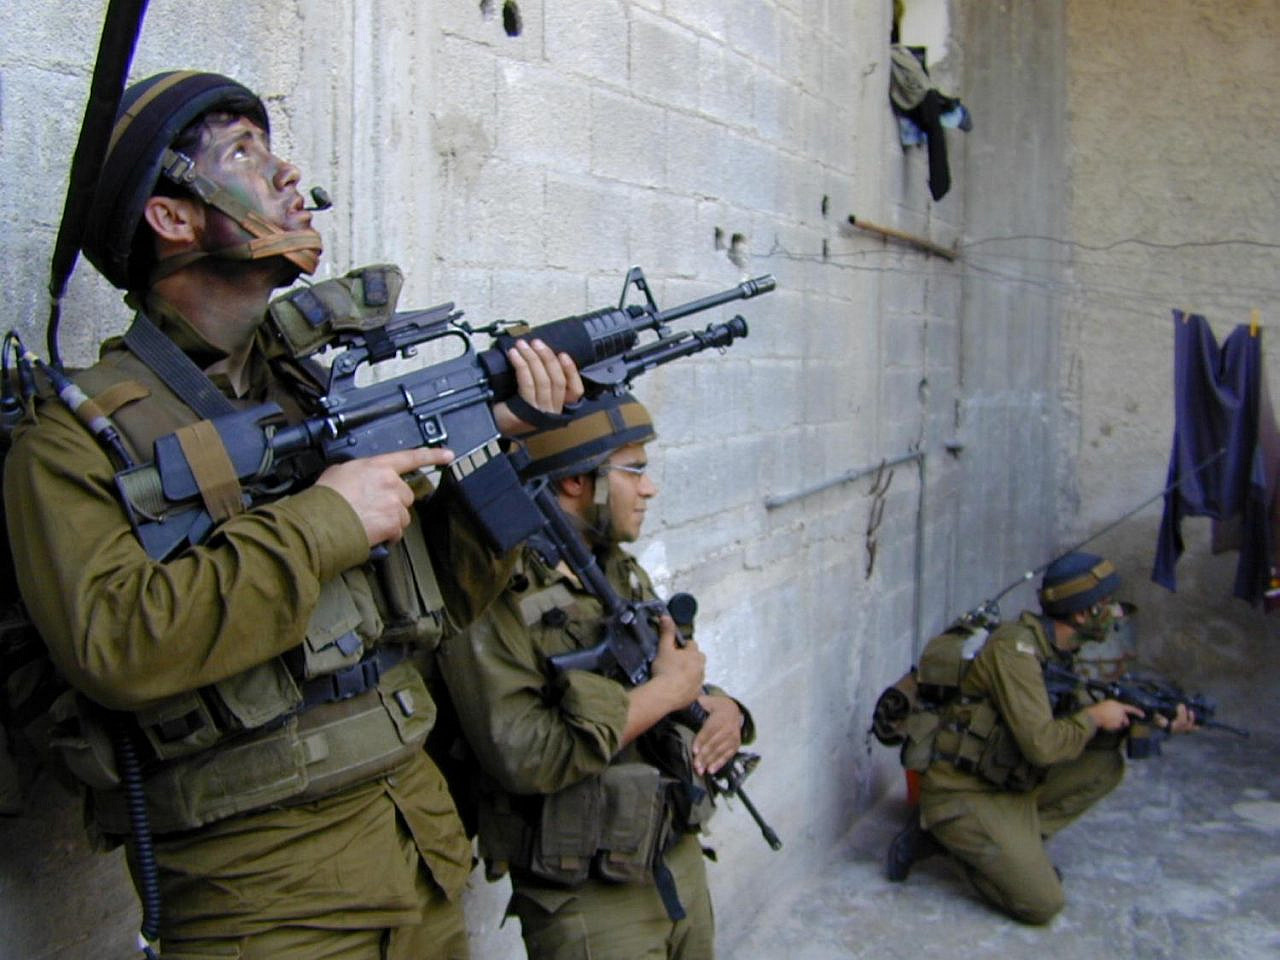 Israeli soldiers at the refugee camp in Jenin, a city in the occupied West Bank, April 20, 2002. (IDF Spokesperson's Unit/CC BY-SA 3.0)